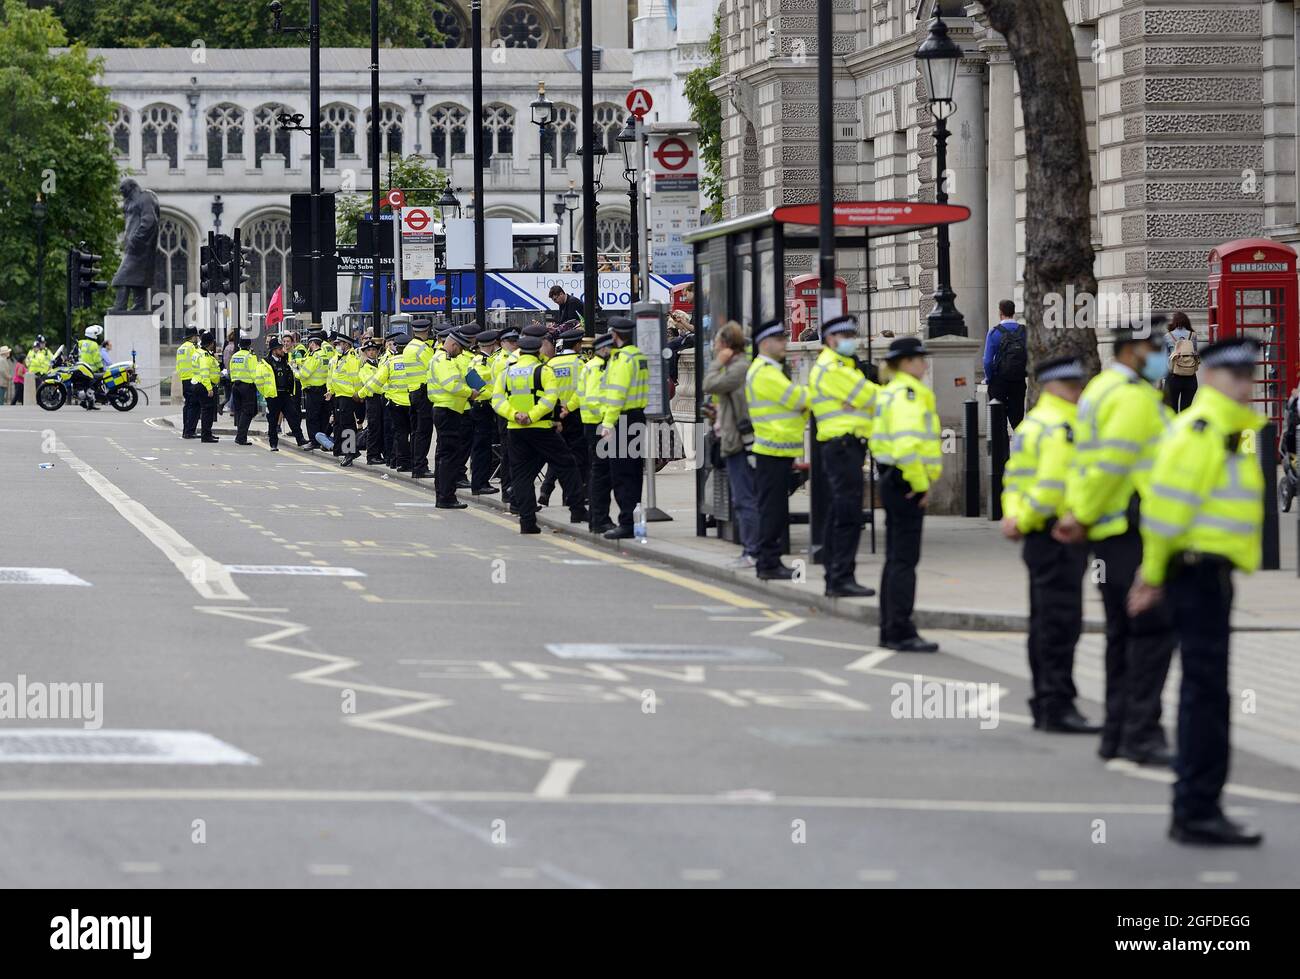 London, England, UK. Policing an Extinction Rebellion protest in Whitehall, 24th August 2021 Stock Photo